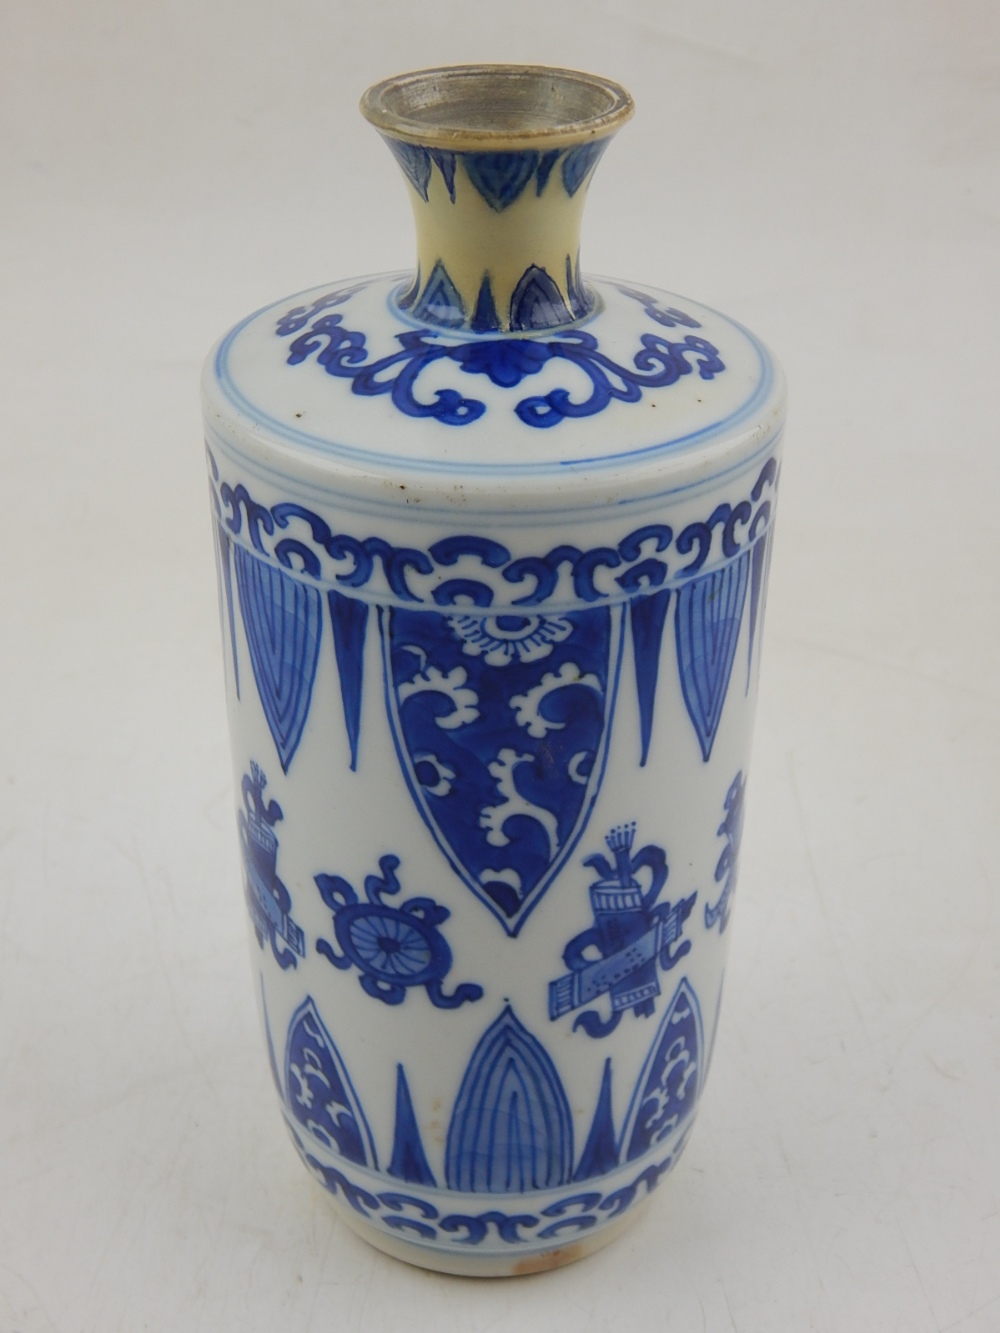 A Chinese Kangxi period blue and white vase, decorated with symbols and pendent bands, H. 17cm.